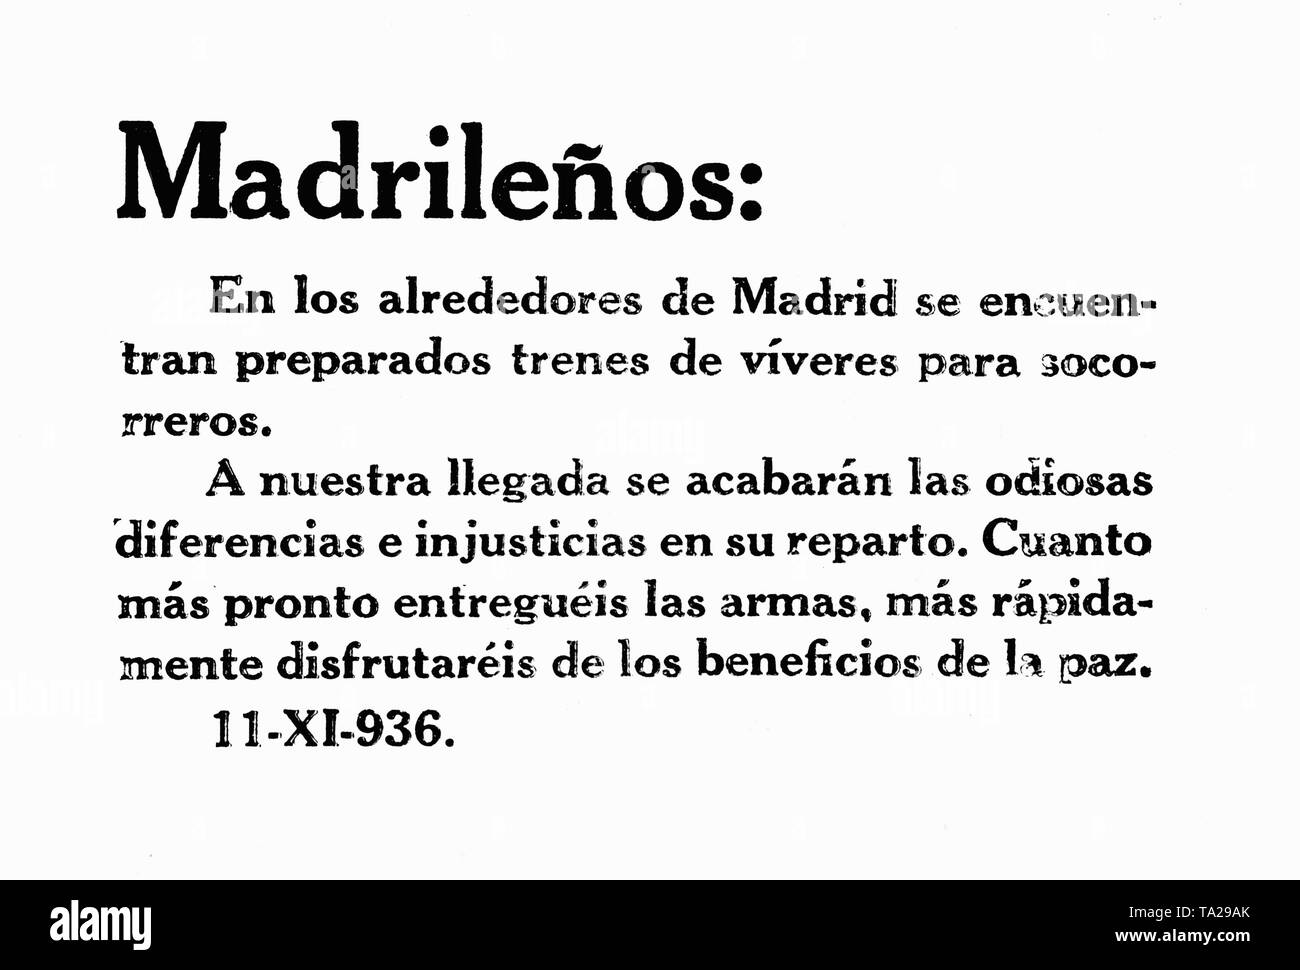 Print of a Spanish national pamphlet to throw over the besieged Madrid on November 11, 1936. English translation: "Citizens of Madrid: In the neighbourhood, there are trains that provide food for help. On our arrival in Madrid, the ugly and despicable fights and injustices cease to happen. The sooner you put your arms down, the sooner you will be able to enjoy the subsidence of peace." Since October 1936, General Francisco Franco had tried to conquer Madrid with his troops. On the 8th of November, General Emilio Mola attacked Madrid directly with his troops and laid siege to the capital. Stock Photo